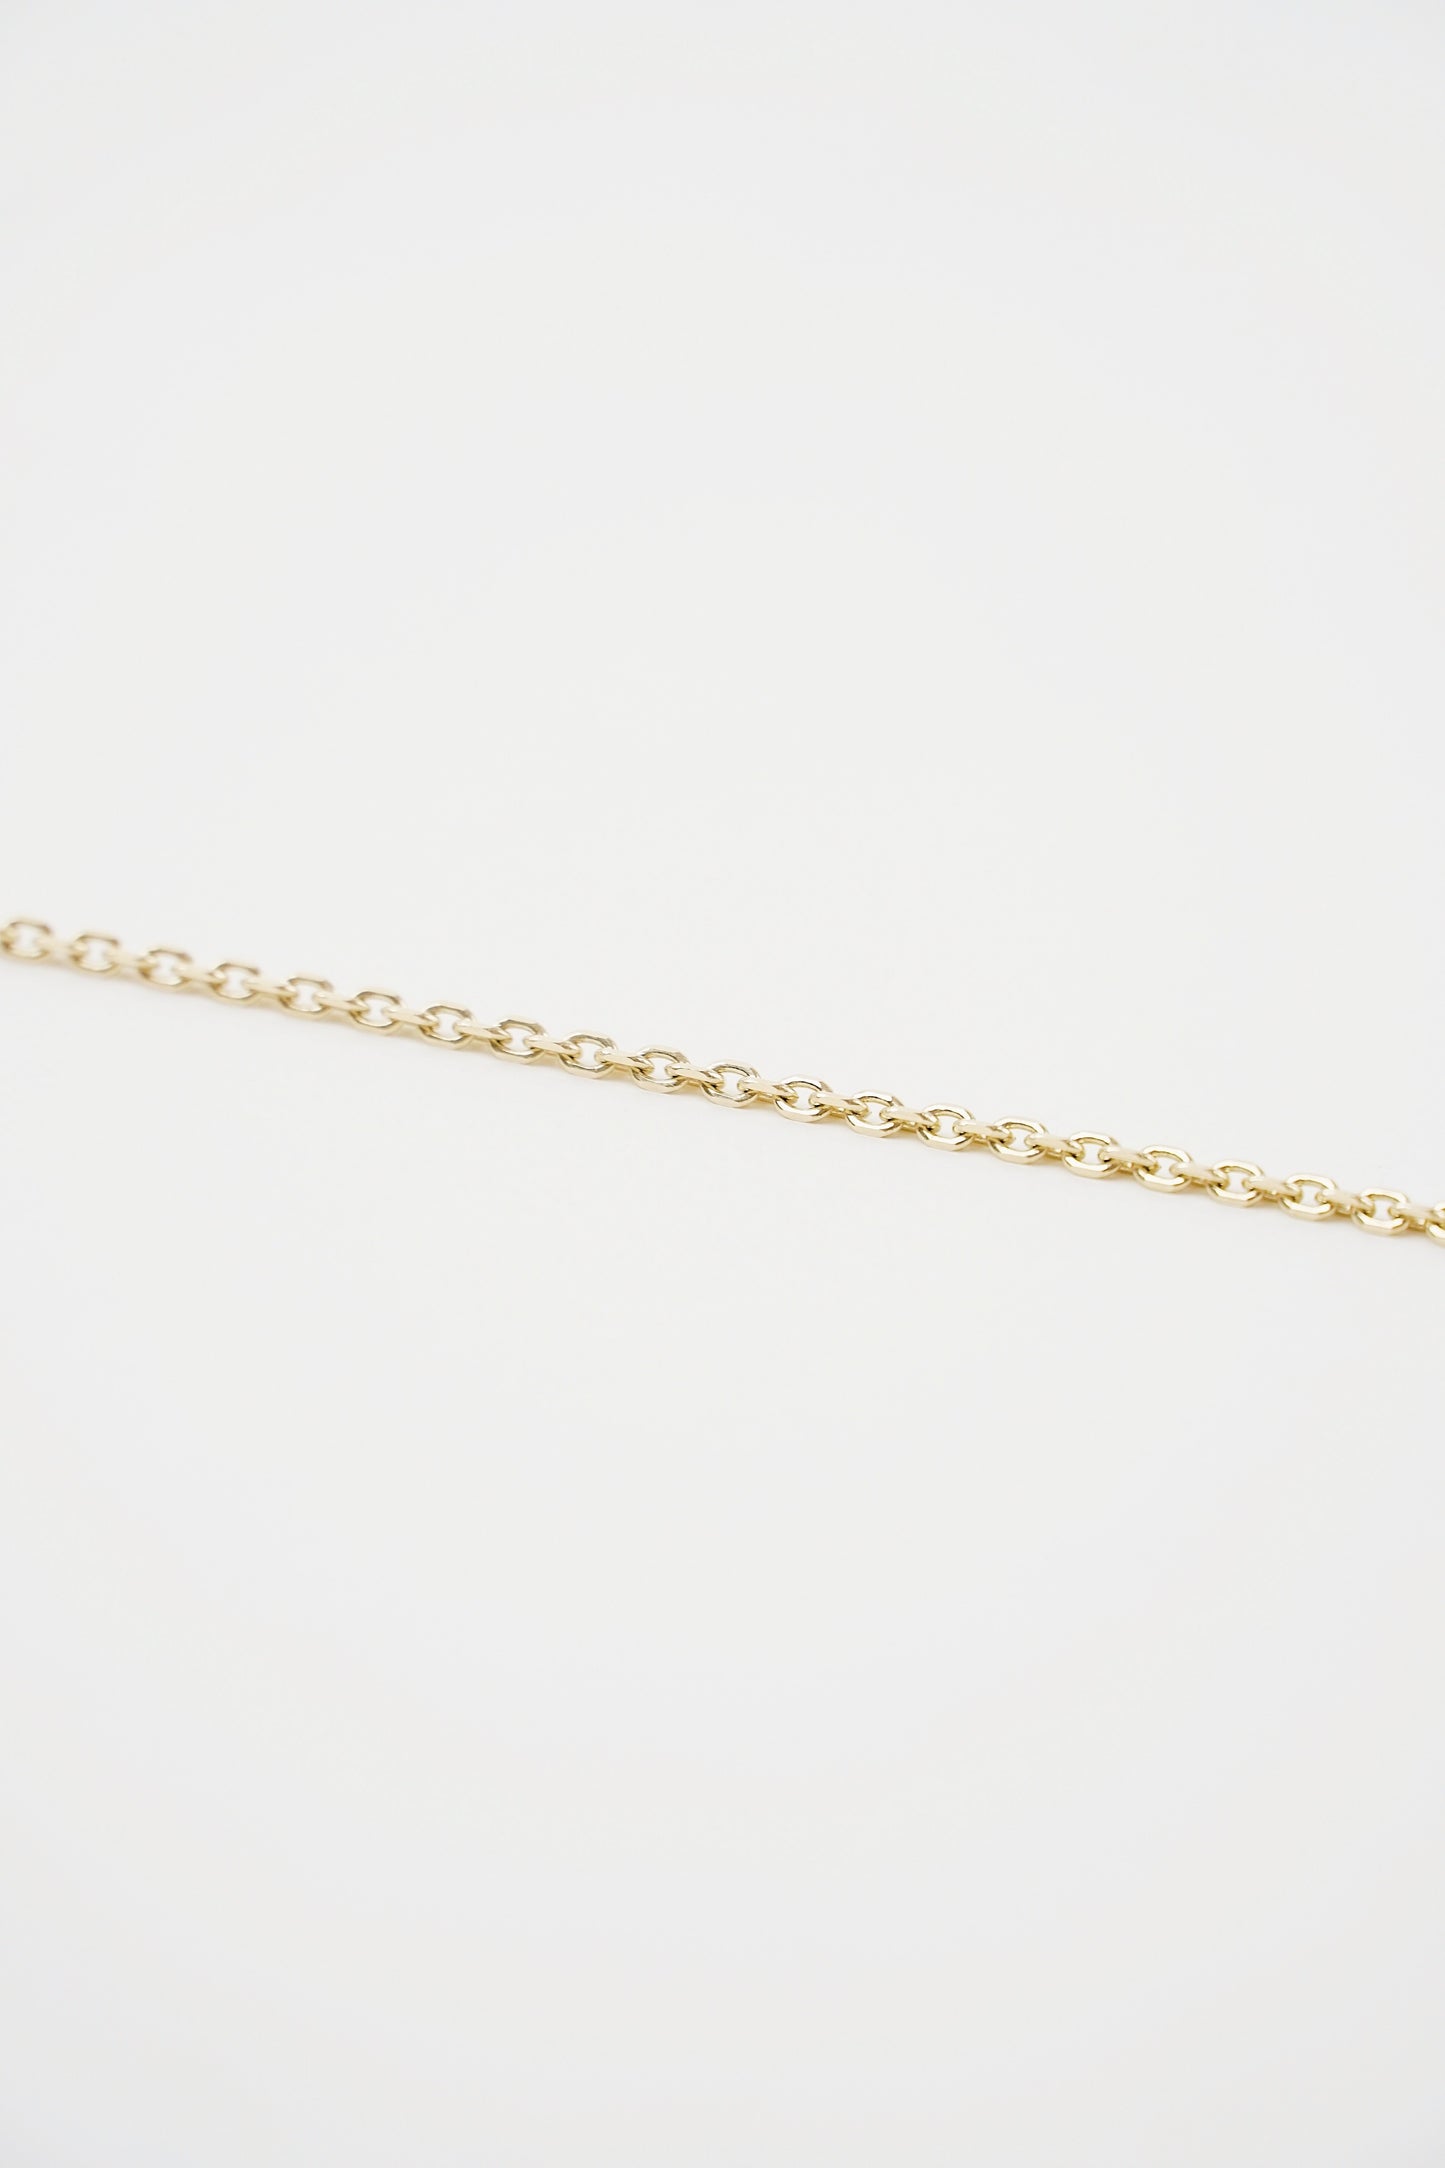 22 " Thick Cable Necklace - 14k Gold